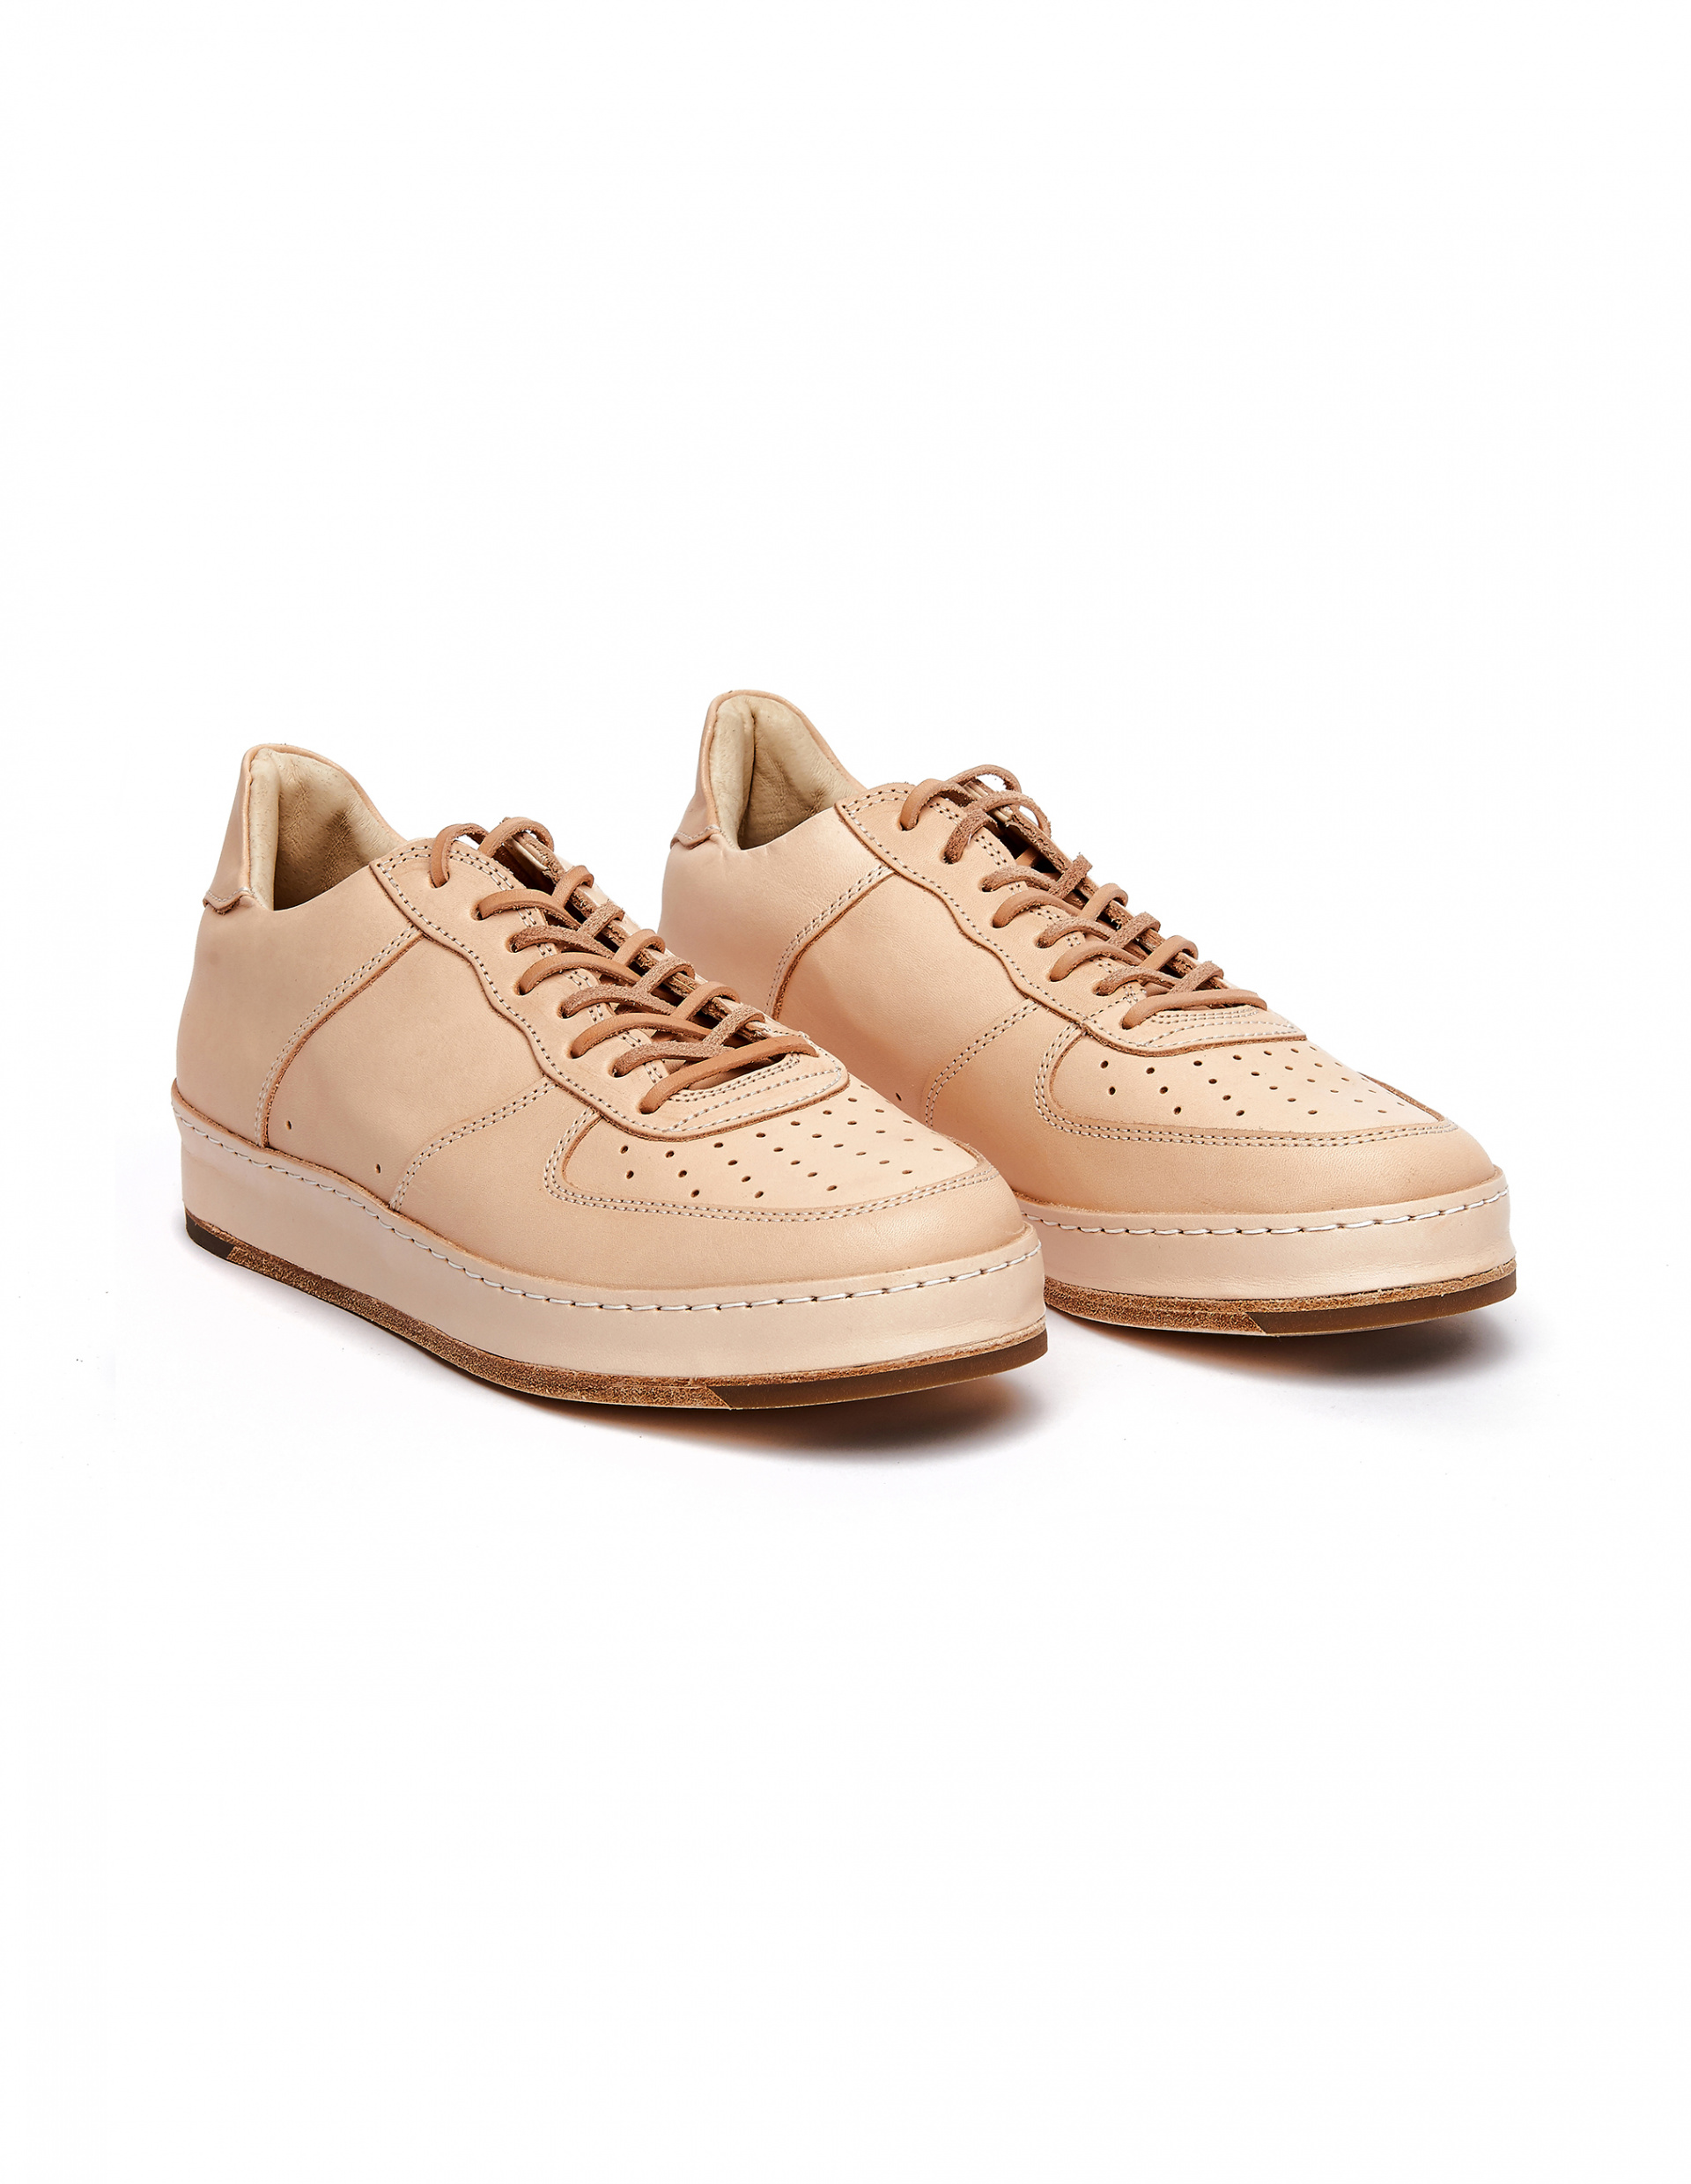 Hender Scheme Shop Men's Homage Sneakers Collection and 